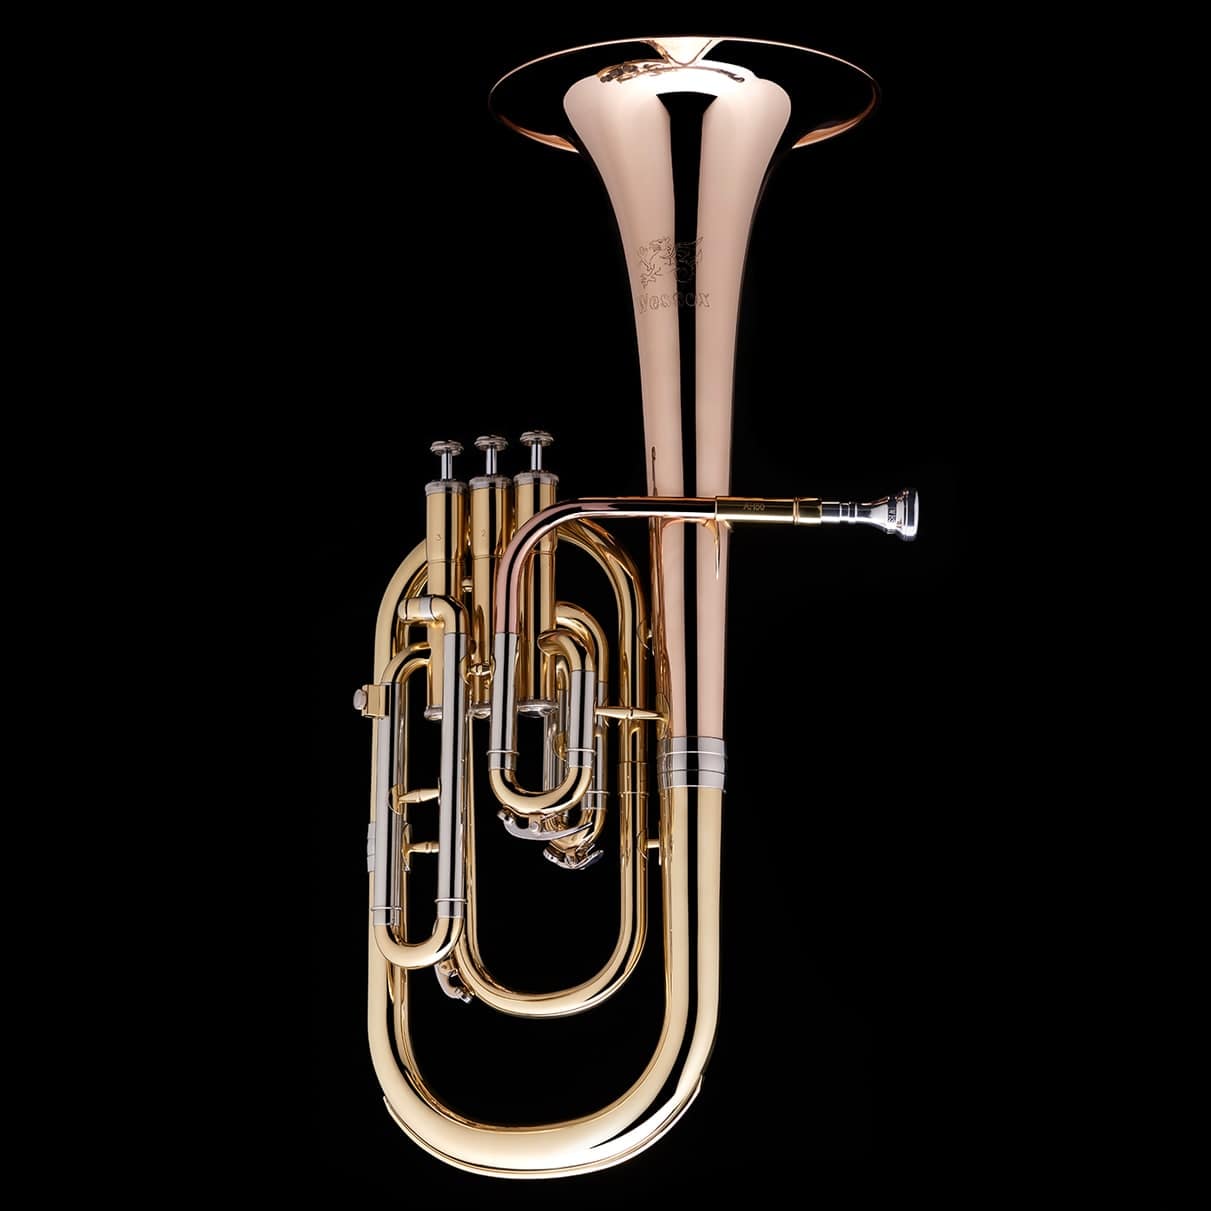 An image of a Eb Tenor/Alto Horn from Wessex Tubas in silver and gold